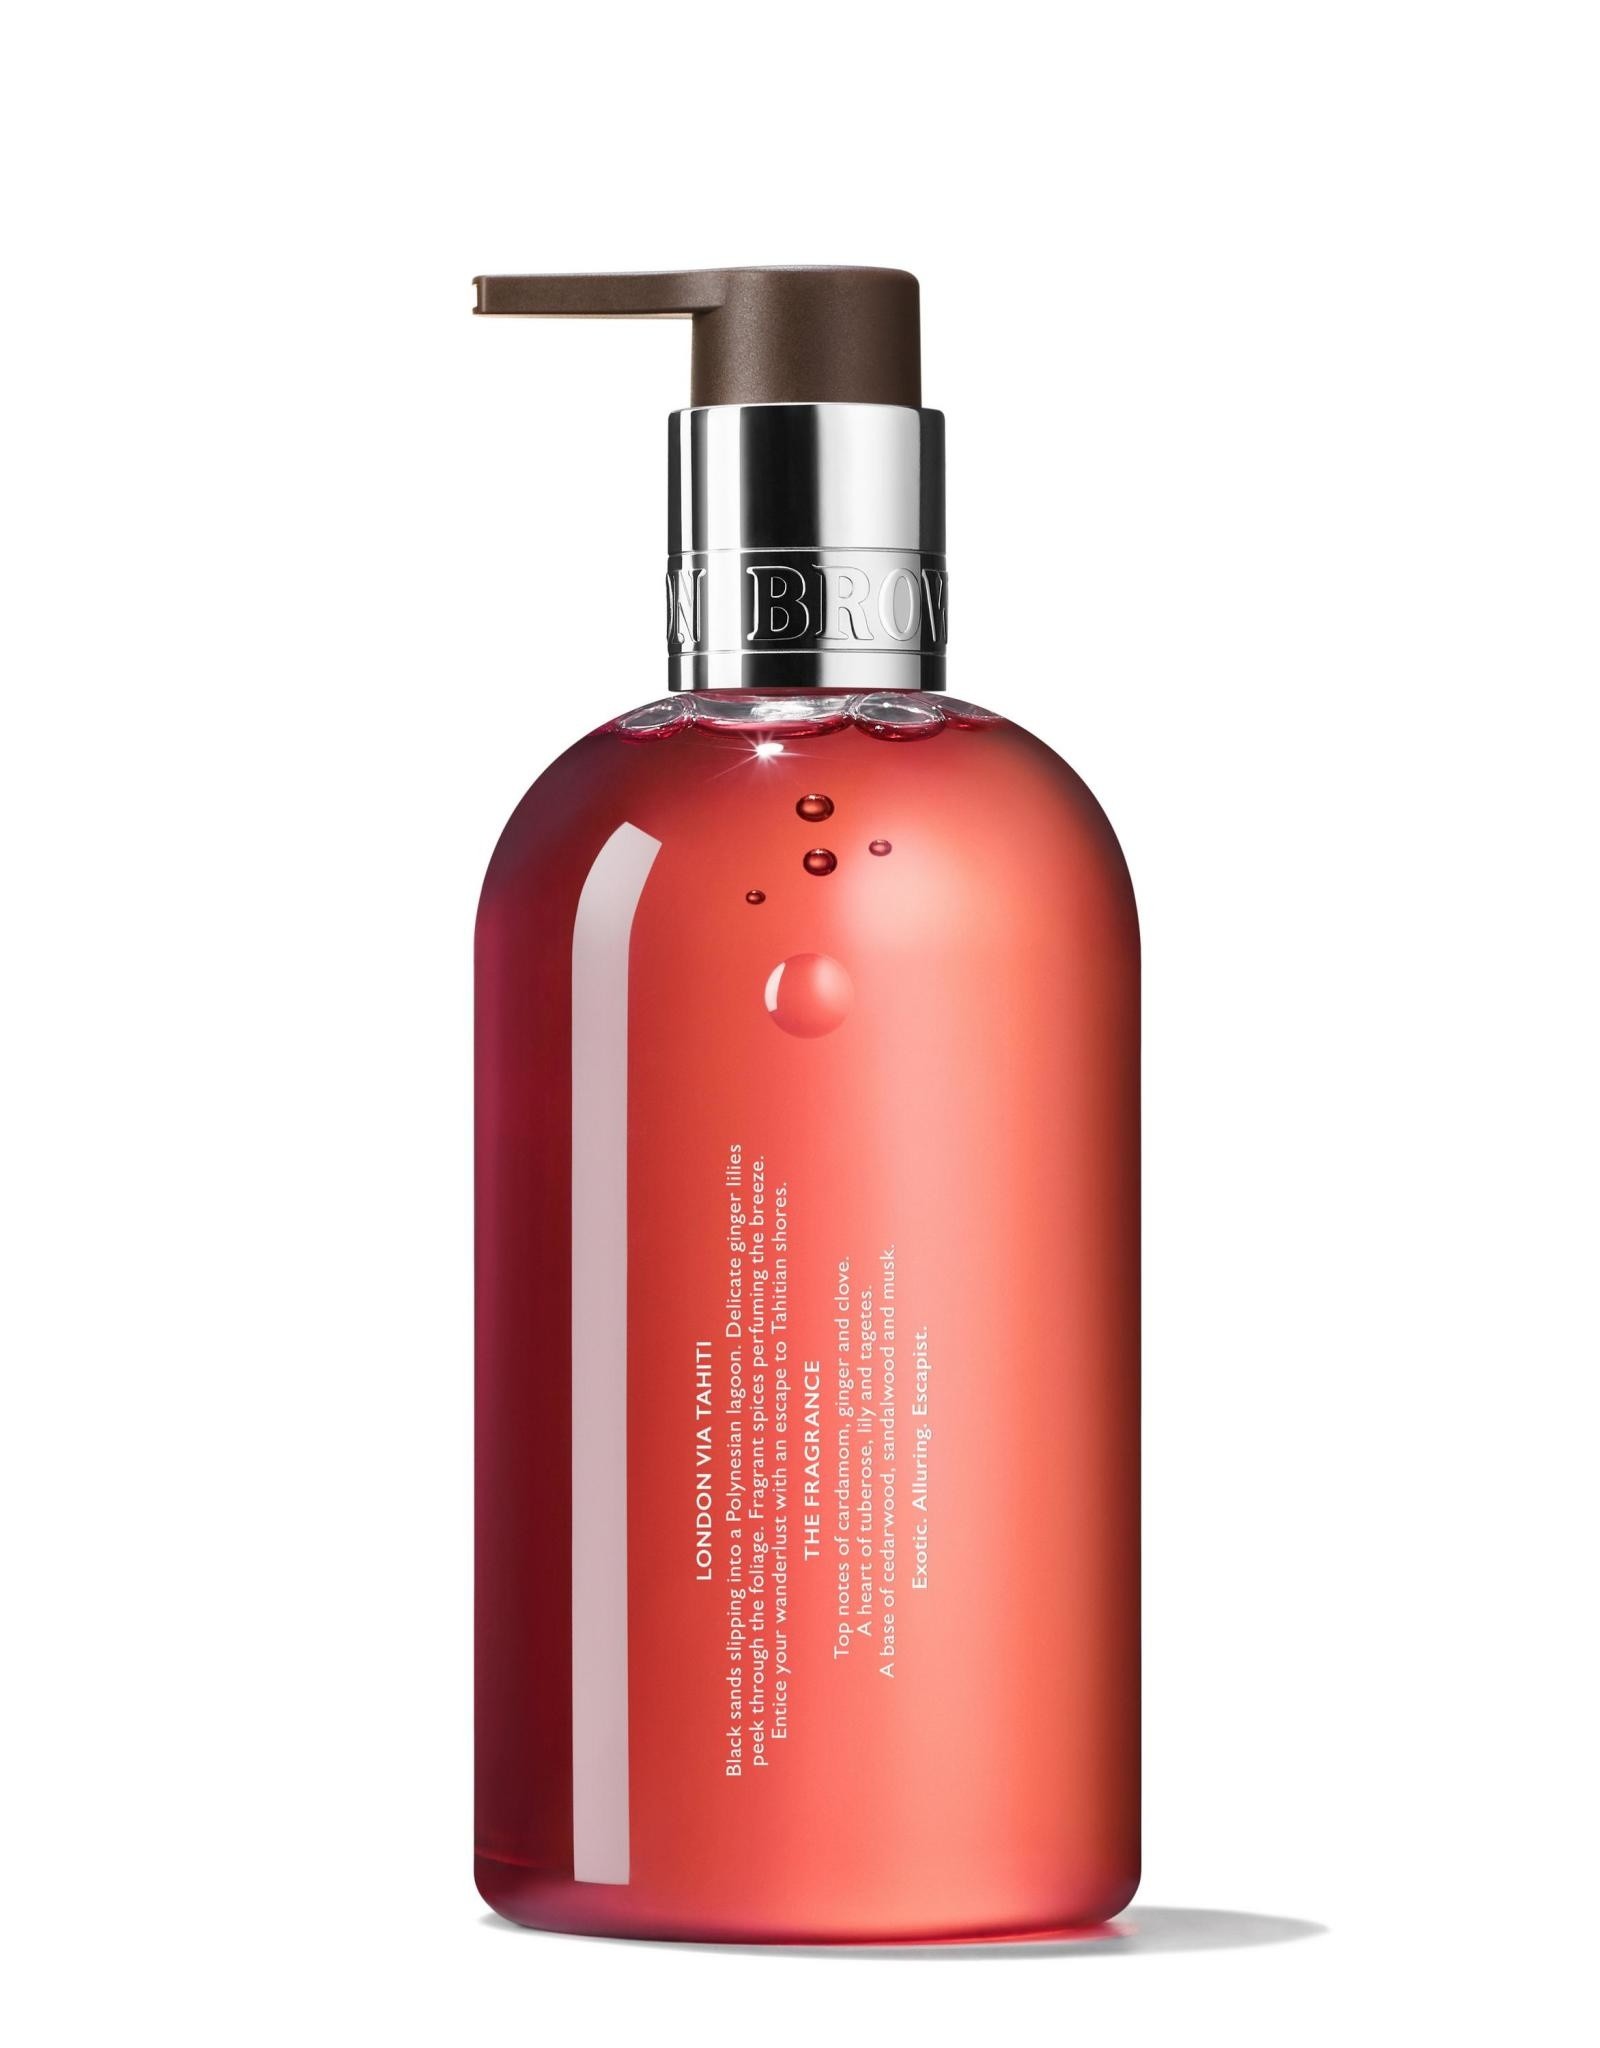 MBL Heavenly Gingerlily Hand Wash